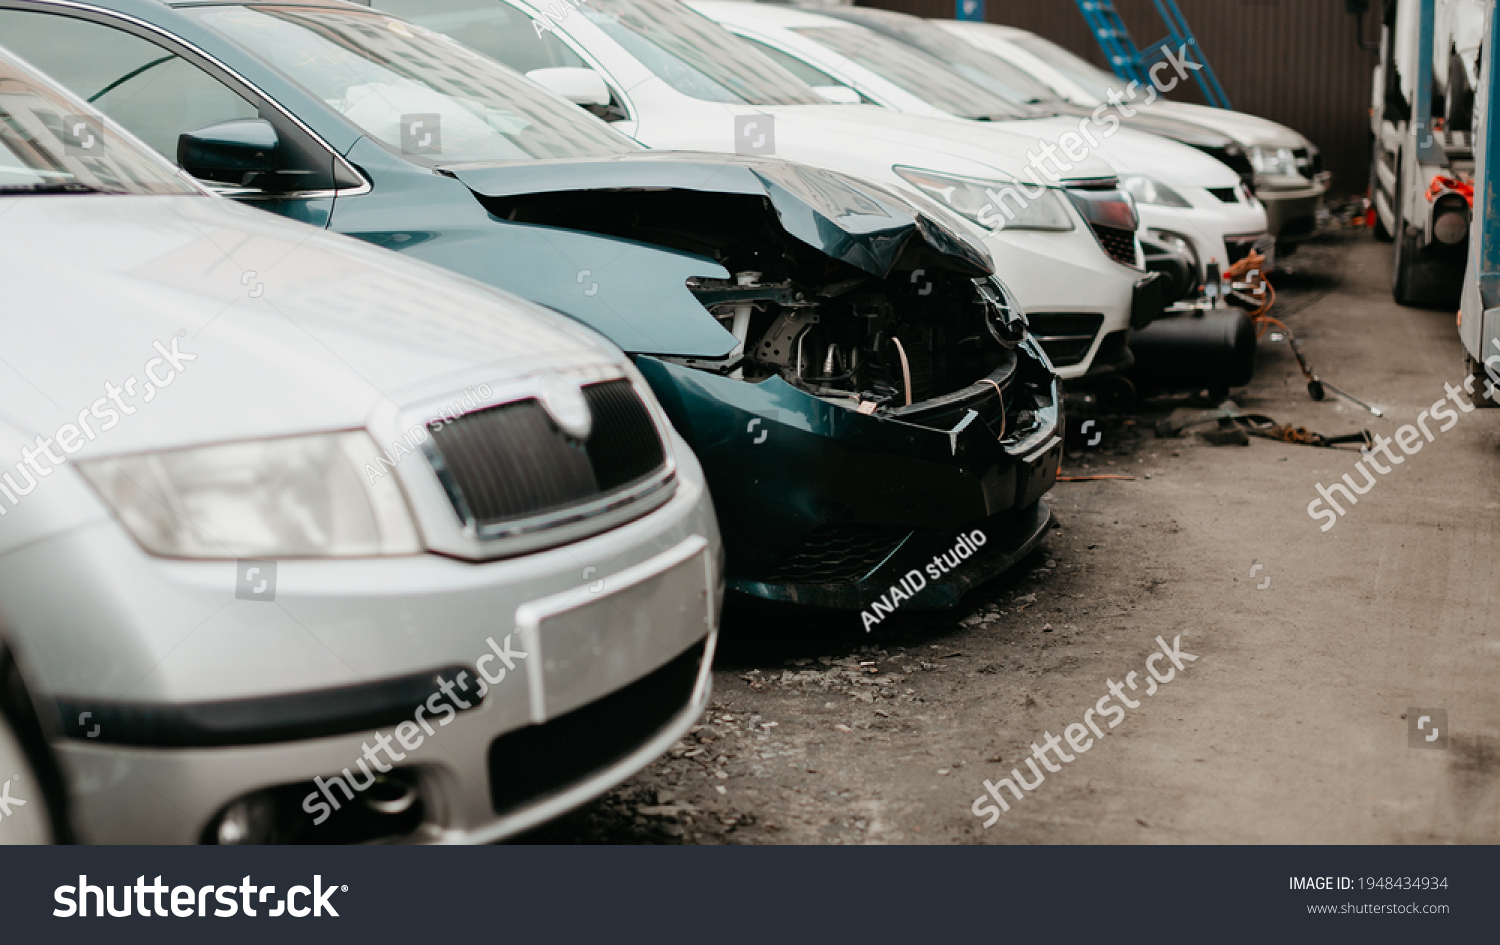 Wrecked cars after traffic accident crash. Insurance salvage vehicle auction wholesale storage. Featuring Used, Wholesale and Salvage Cars. #1948434934